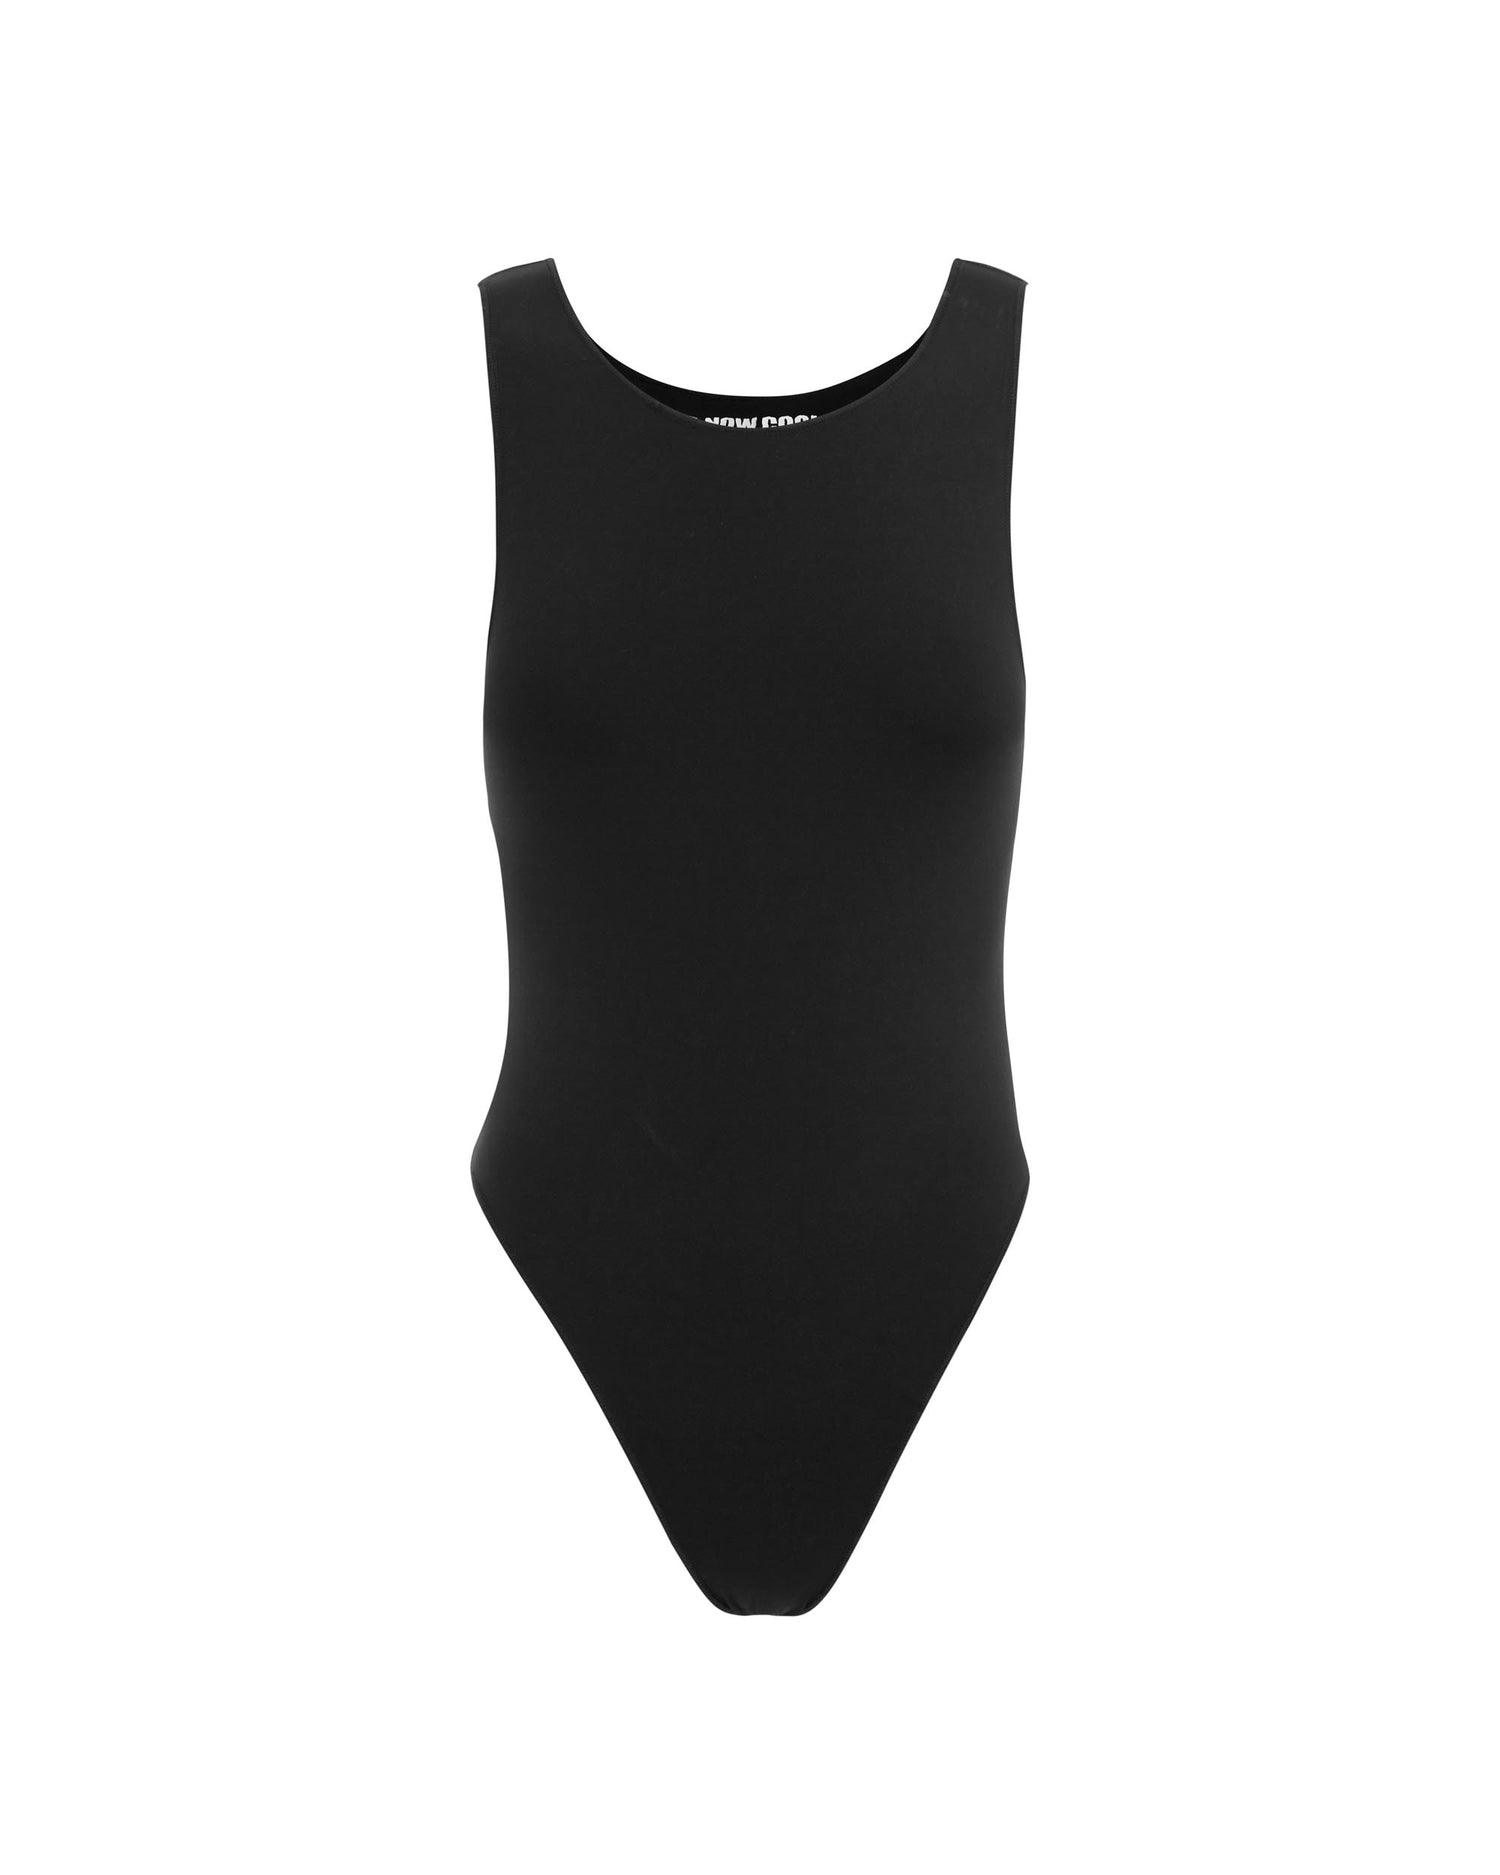 SKIMS Contour Body Suit Black - $57 (16% Off Retail) - From Taylor